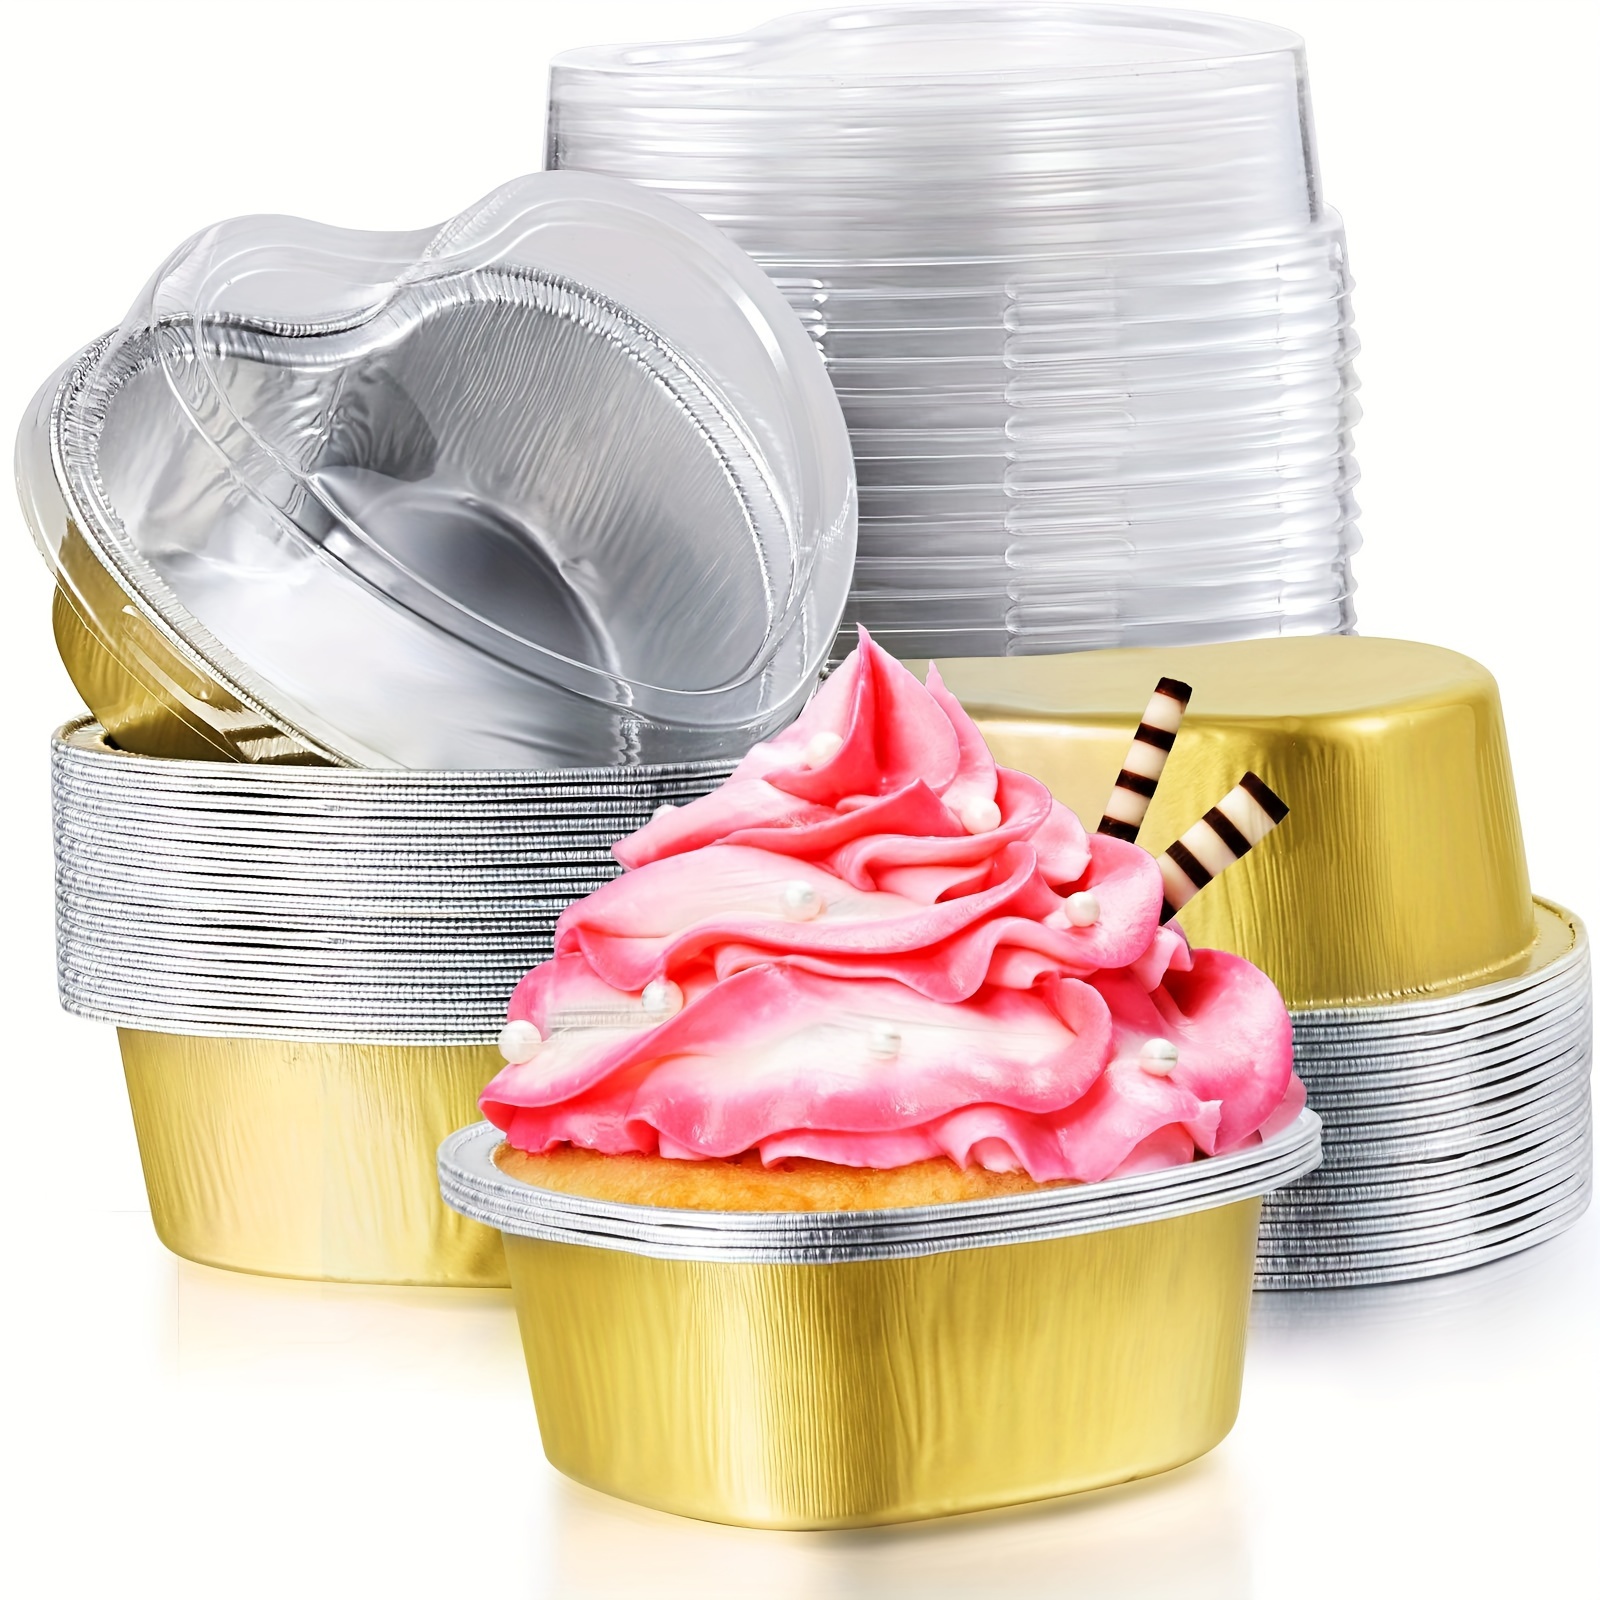 100pcs Paper Cupcake Cup 2.5oz Standard Muffin Baking Cups Liners Cupcakes  Case